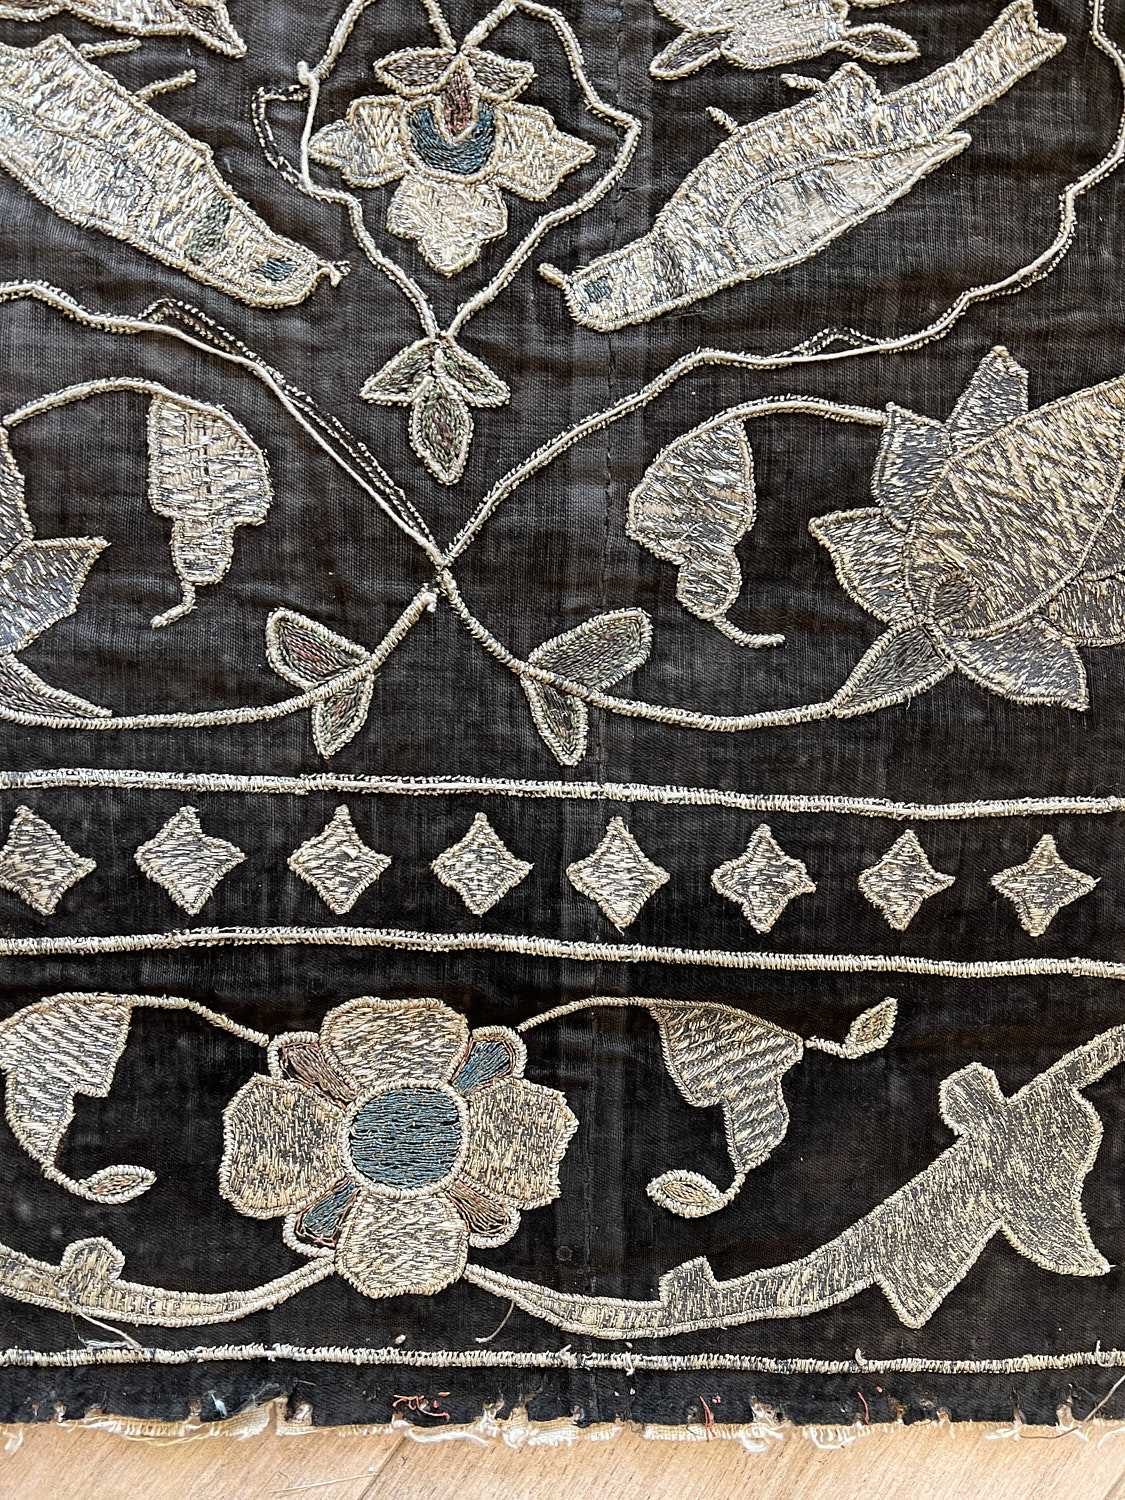 AN EARLY 19TH CENTURY OTTOMAN VELVET AND METAL THREAD TEXTILE, PERSIAN - Image 2 of 8